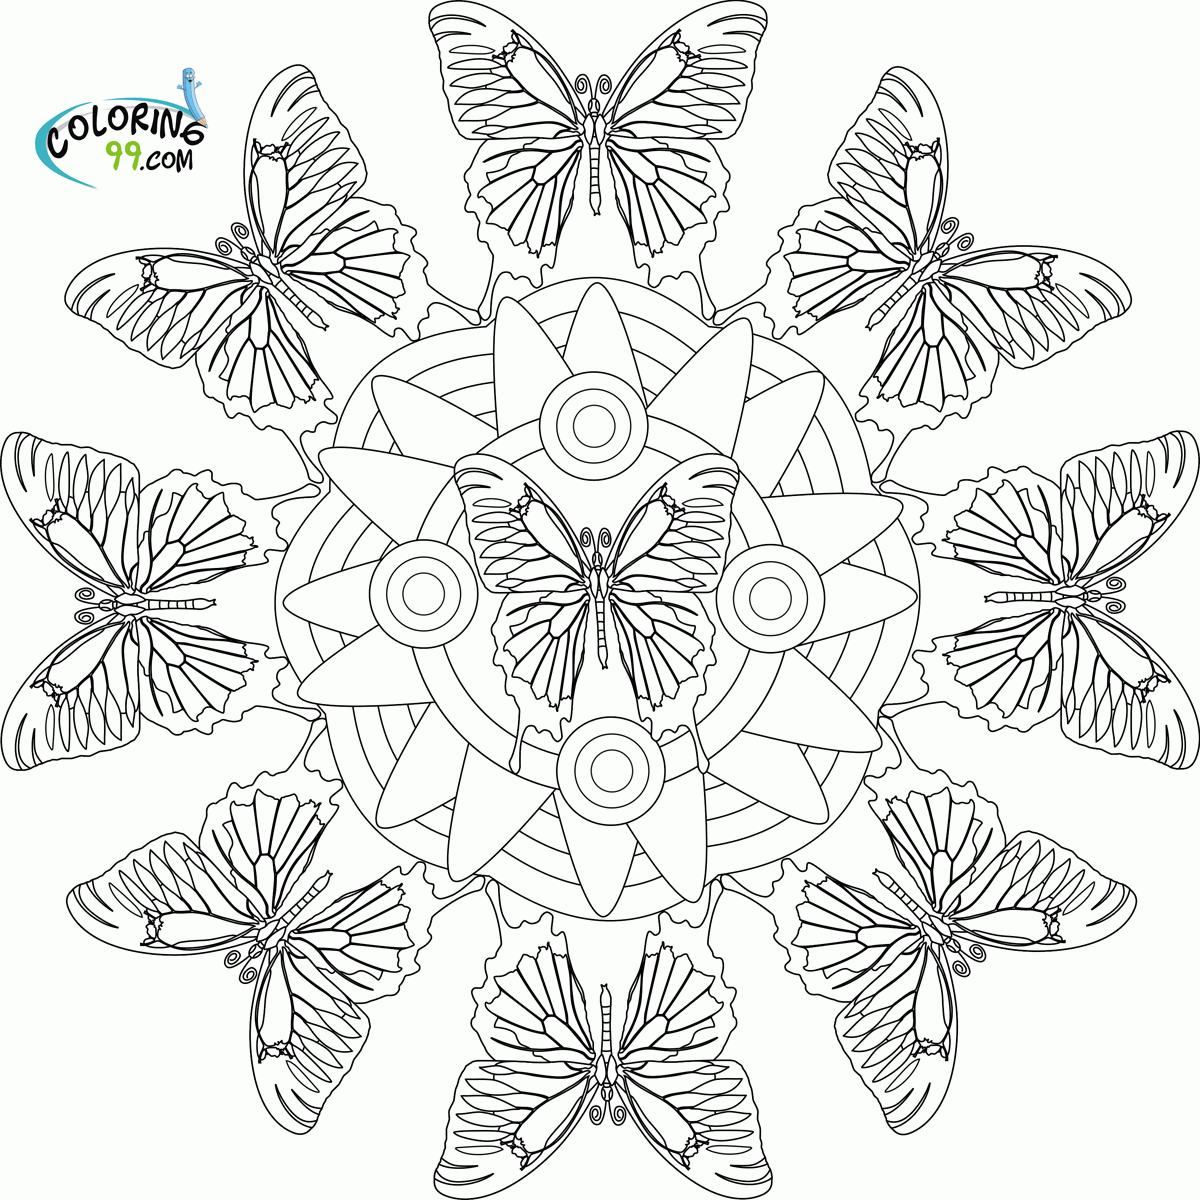  Free Mandala Coloring Pages Butterflies 